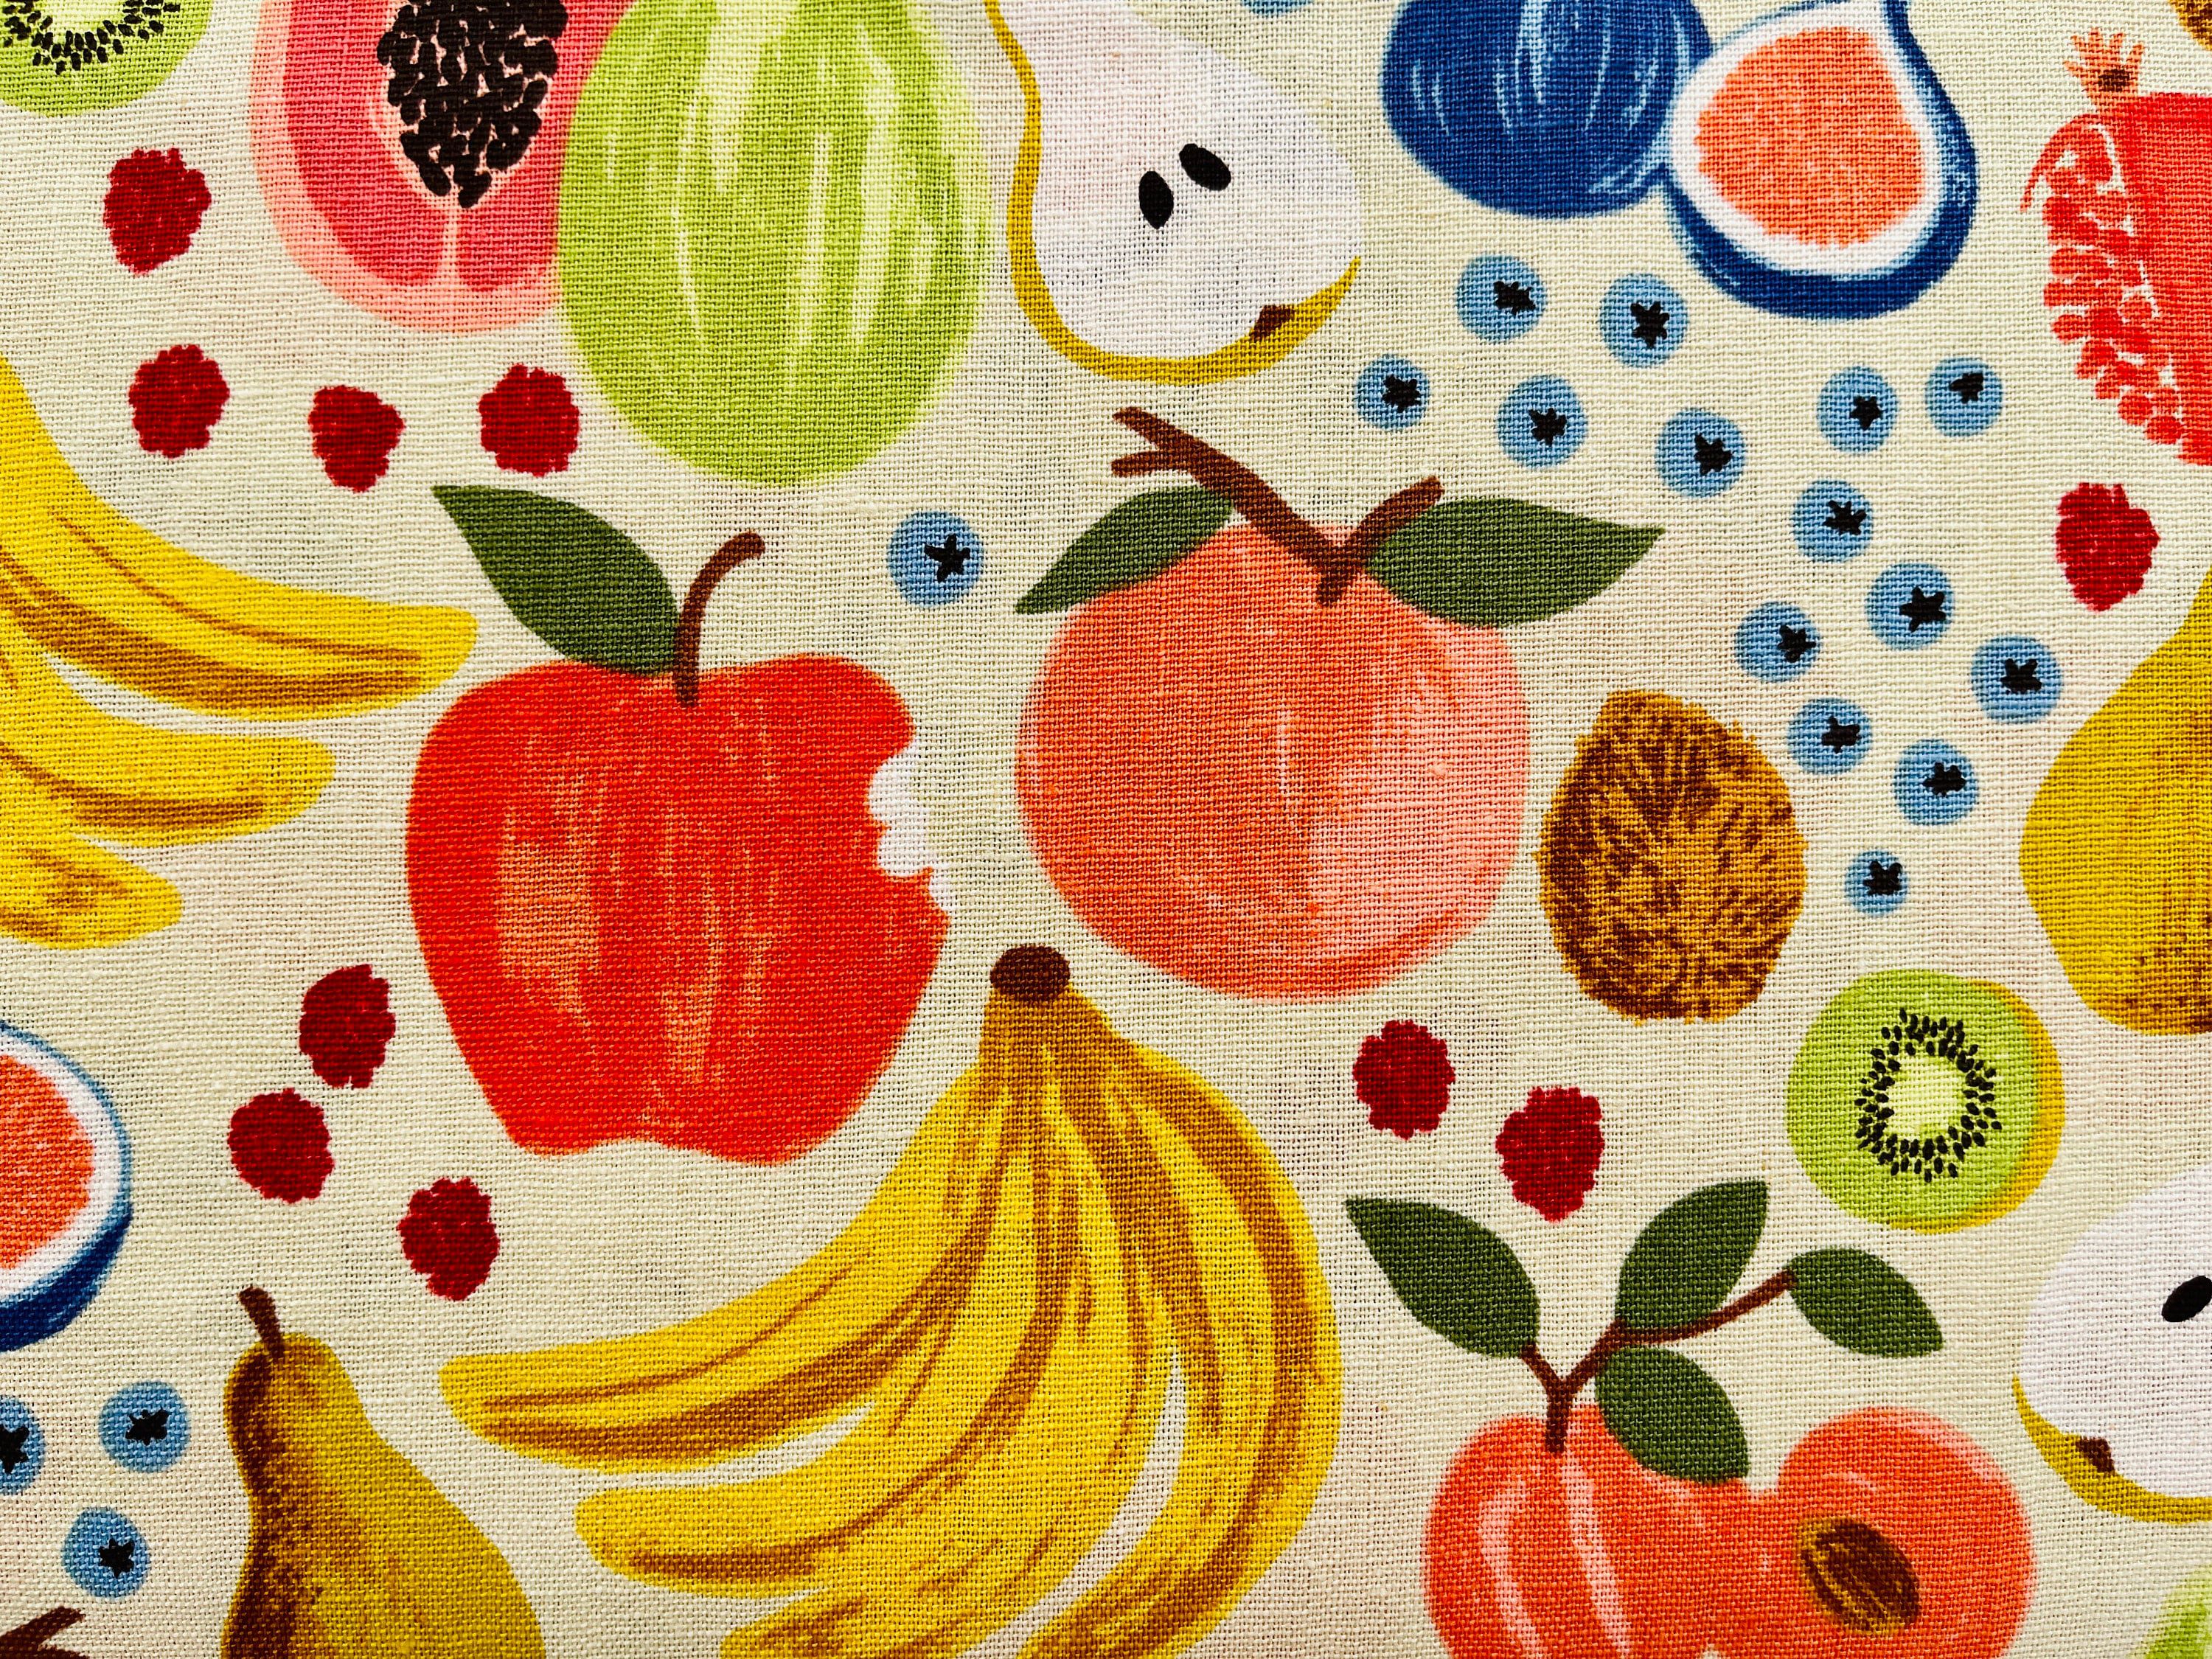 Orchard-Fruit Stand-Cream Canvas Fabric-Rifle Paper Co-Cotton+Steel-RP1200-CR5C